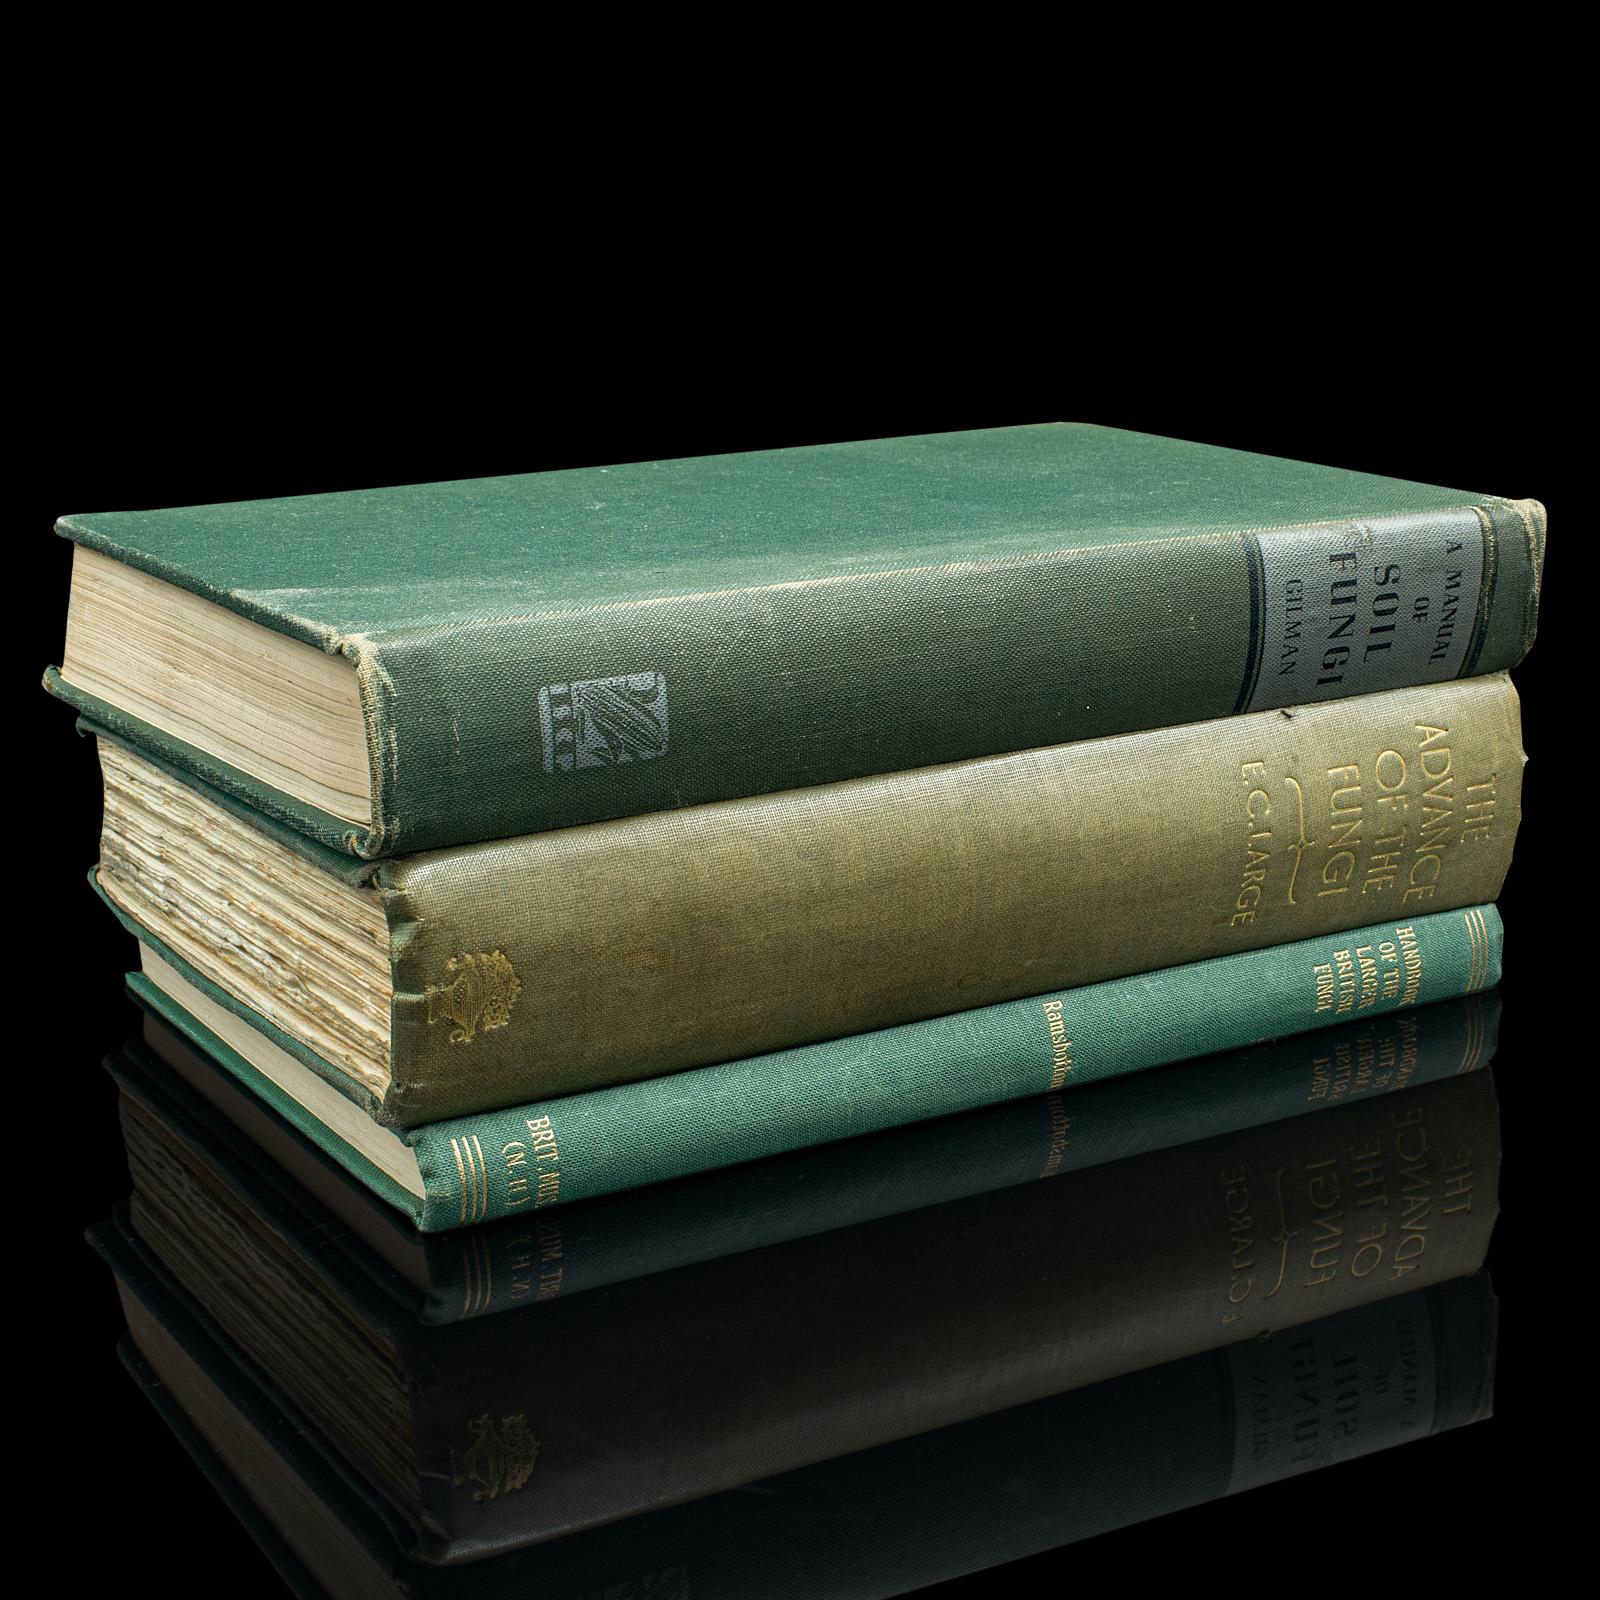 
This is a set of 3 vintage Fungi reference books. In English, hard bound scientific biology titles, published in the mid 20th century.

Comprising the following three titles: A Manual of Soil Fungi (1945) Iowa, USA - 392 pages; The Advance of the